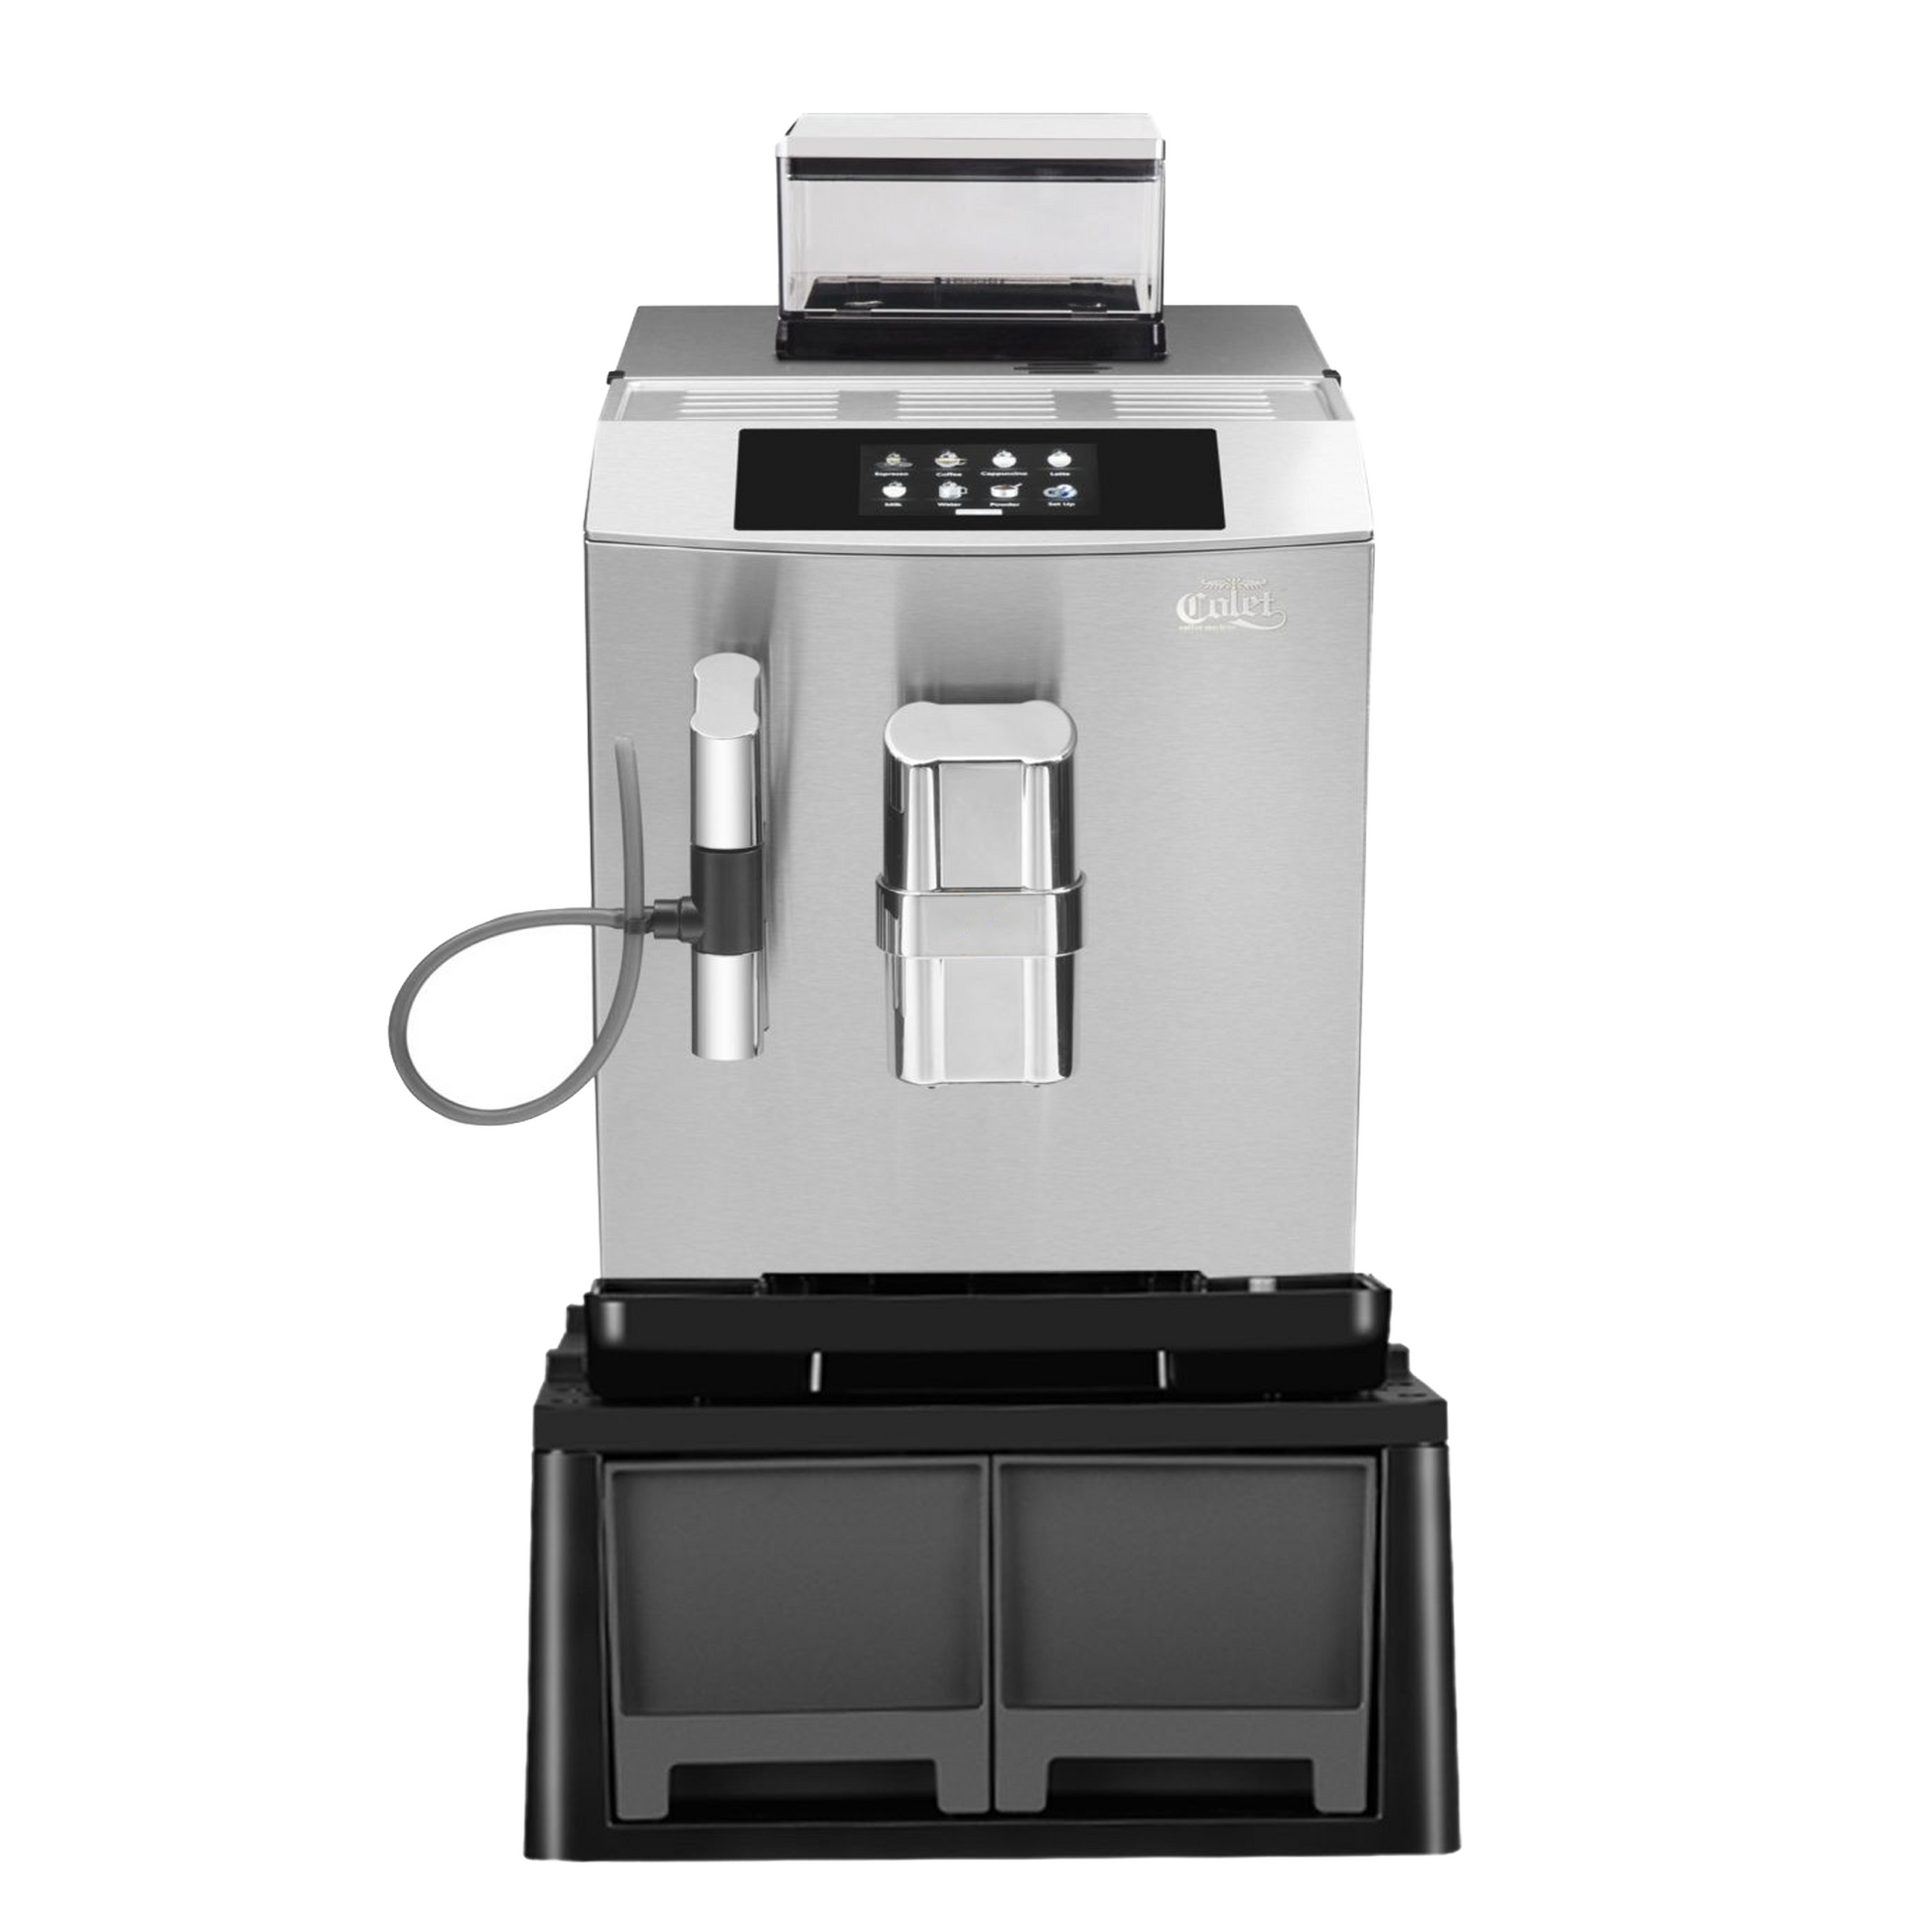 Bean to cup coffee machines - Products - Full automatic coffee